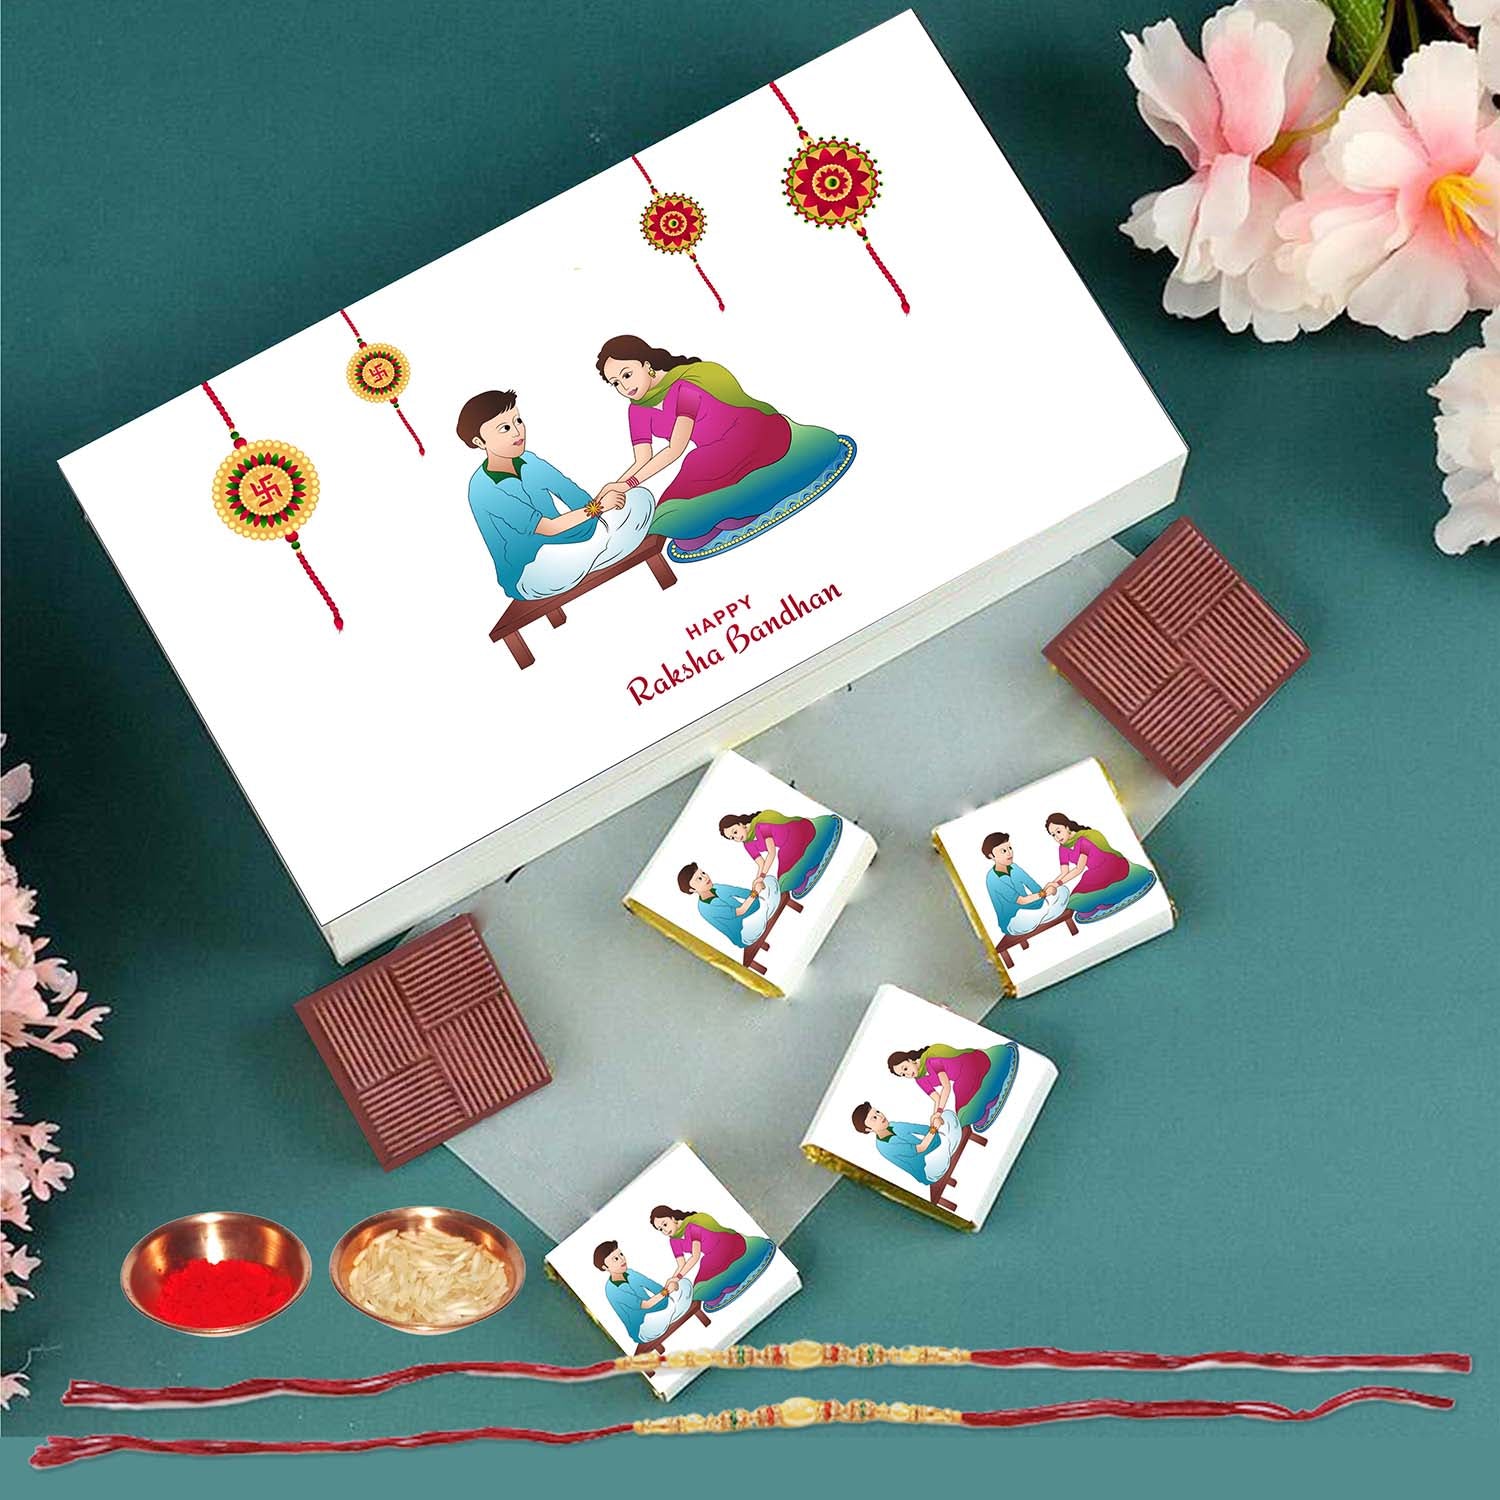 white chocolate gift box for your sister on this rakhi ]